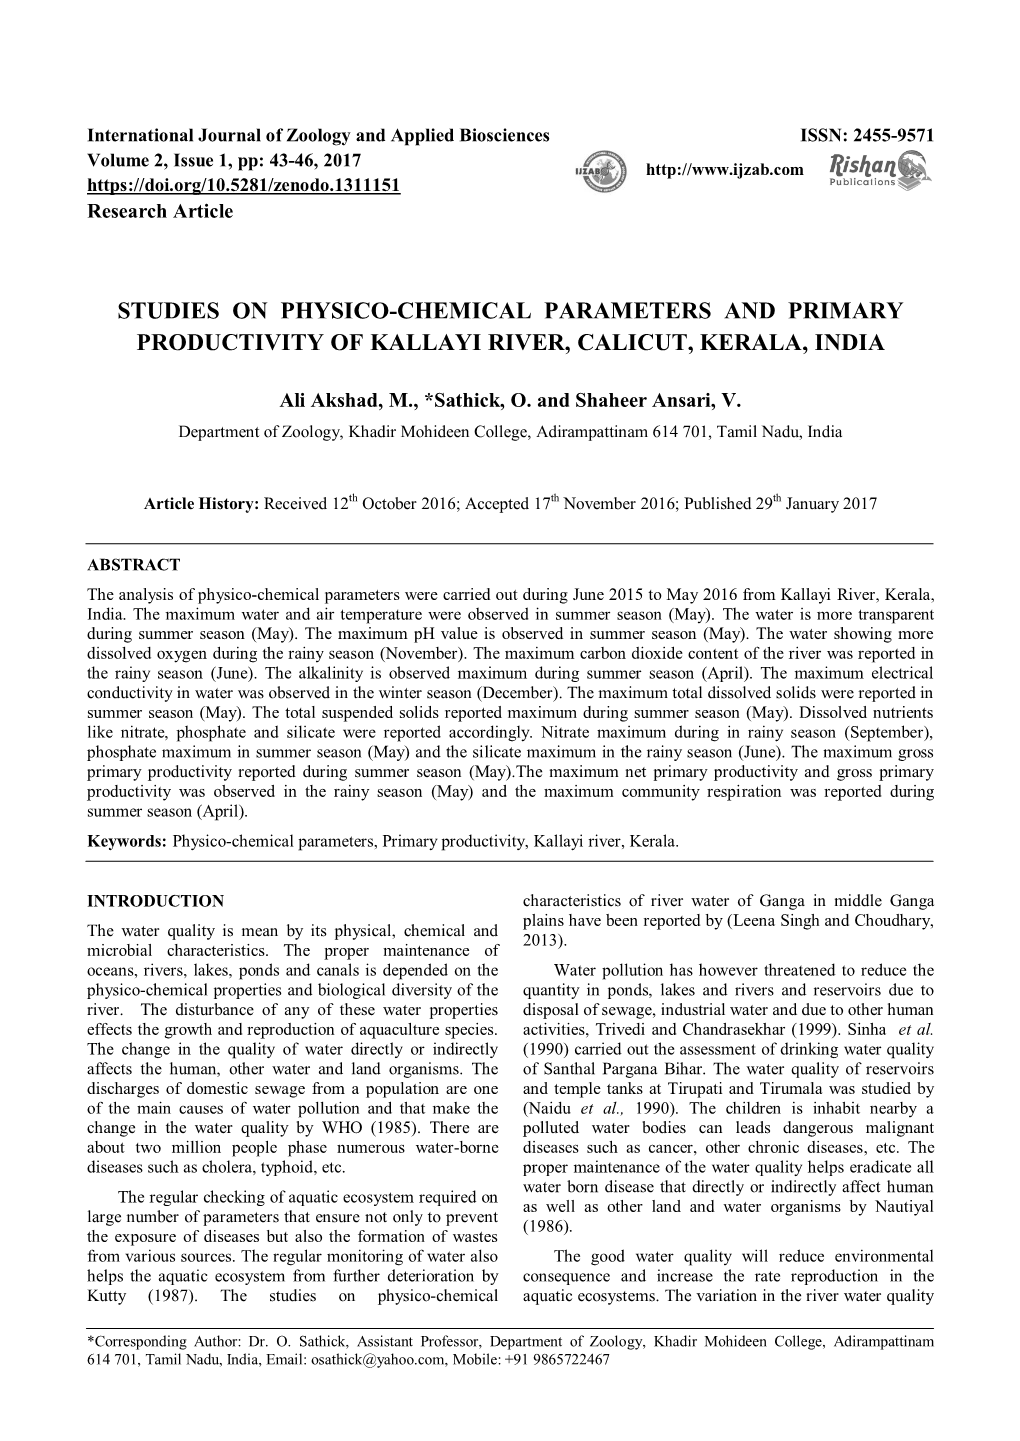 Studies on Physico-Chemical Parameters and Primary Productivity of Kallayi River, Calicut, Kerala, India